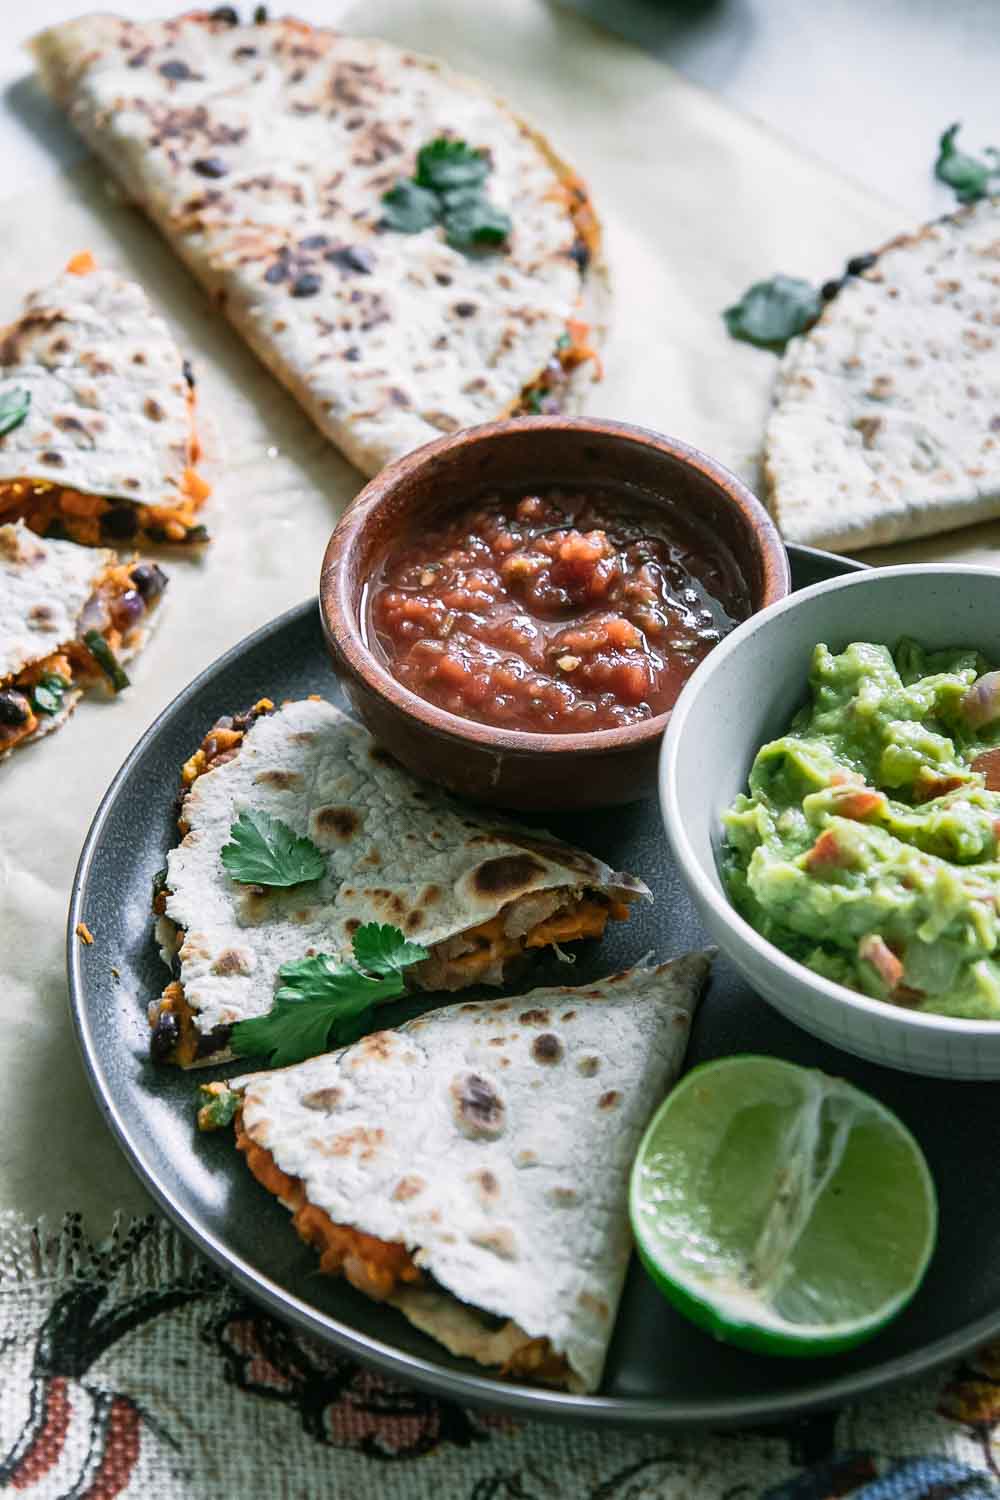 a plant-based quesadilla on a plate with cut quesadilla pieces on a table with small bowls of guacamole and salsa